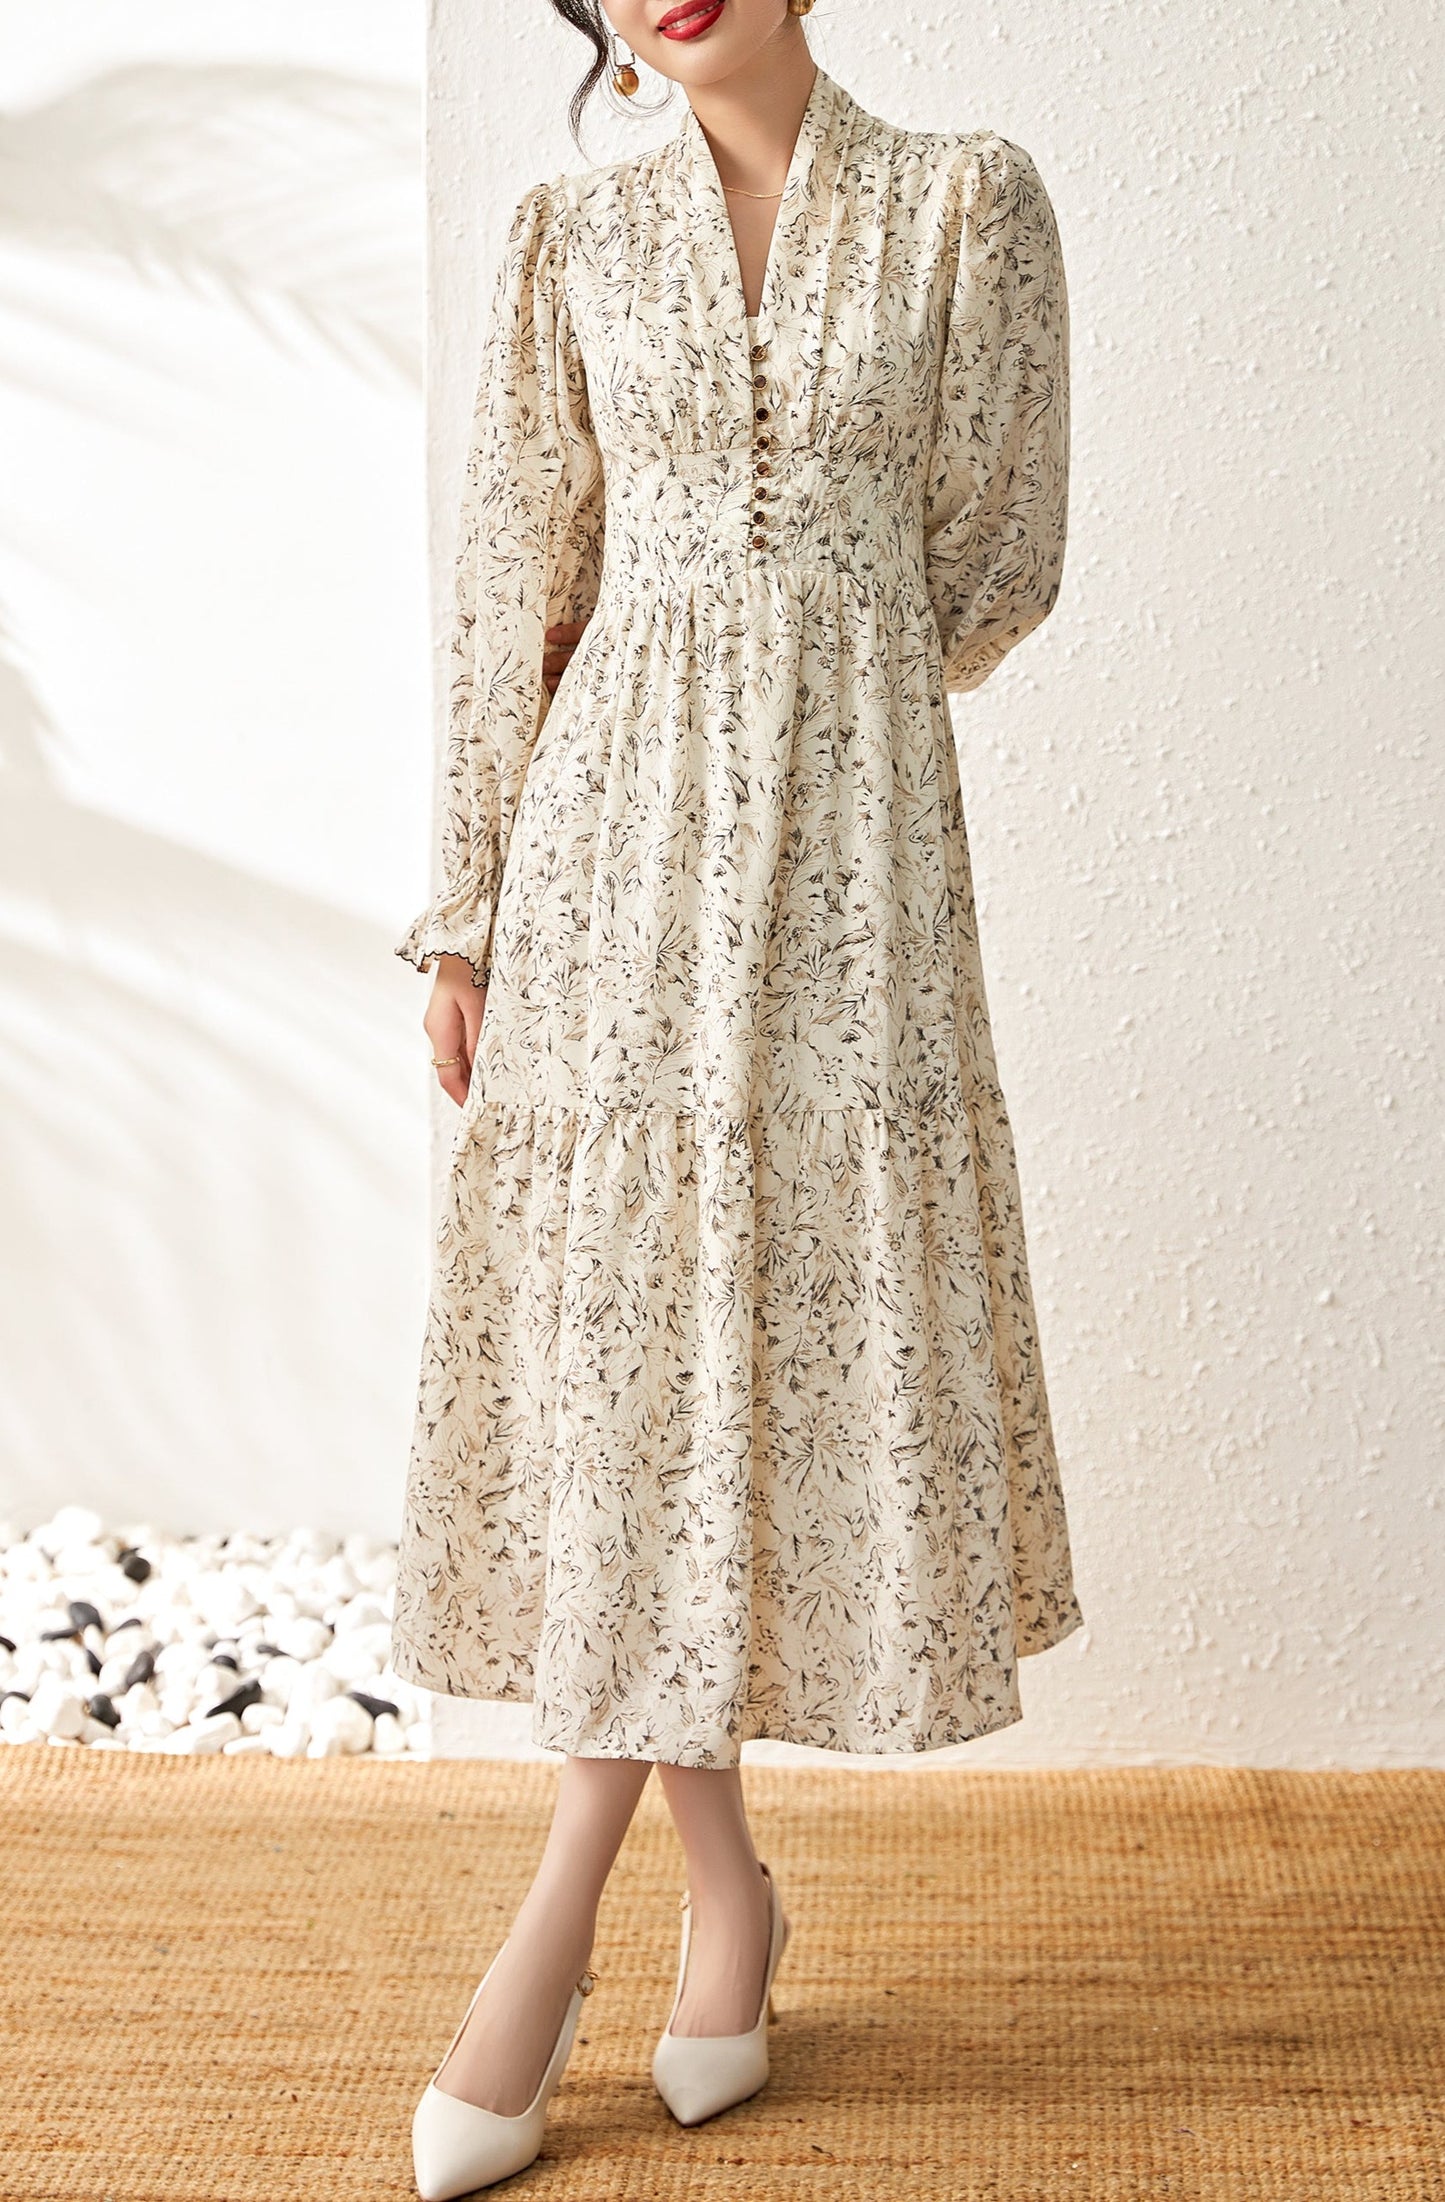 Jules floral hemp dress with elastic gathered waist and exquisite shank buttons